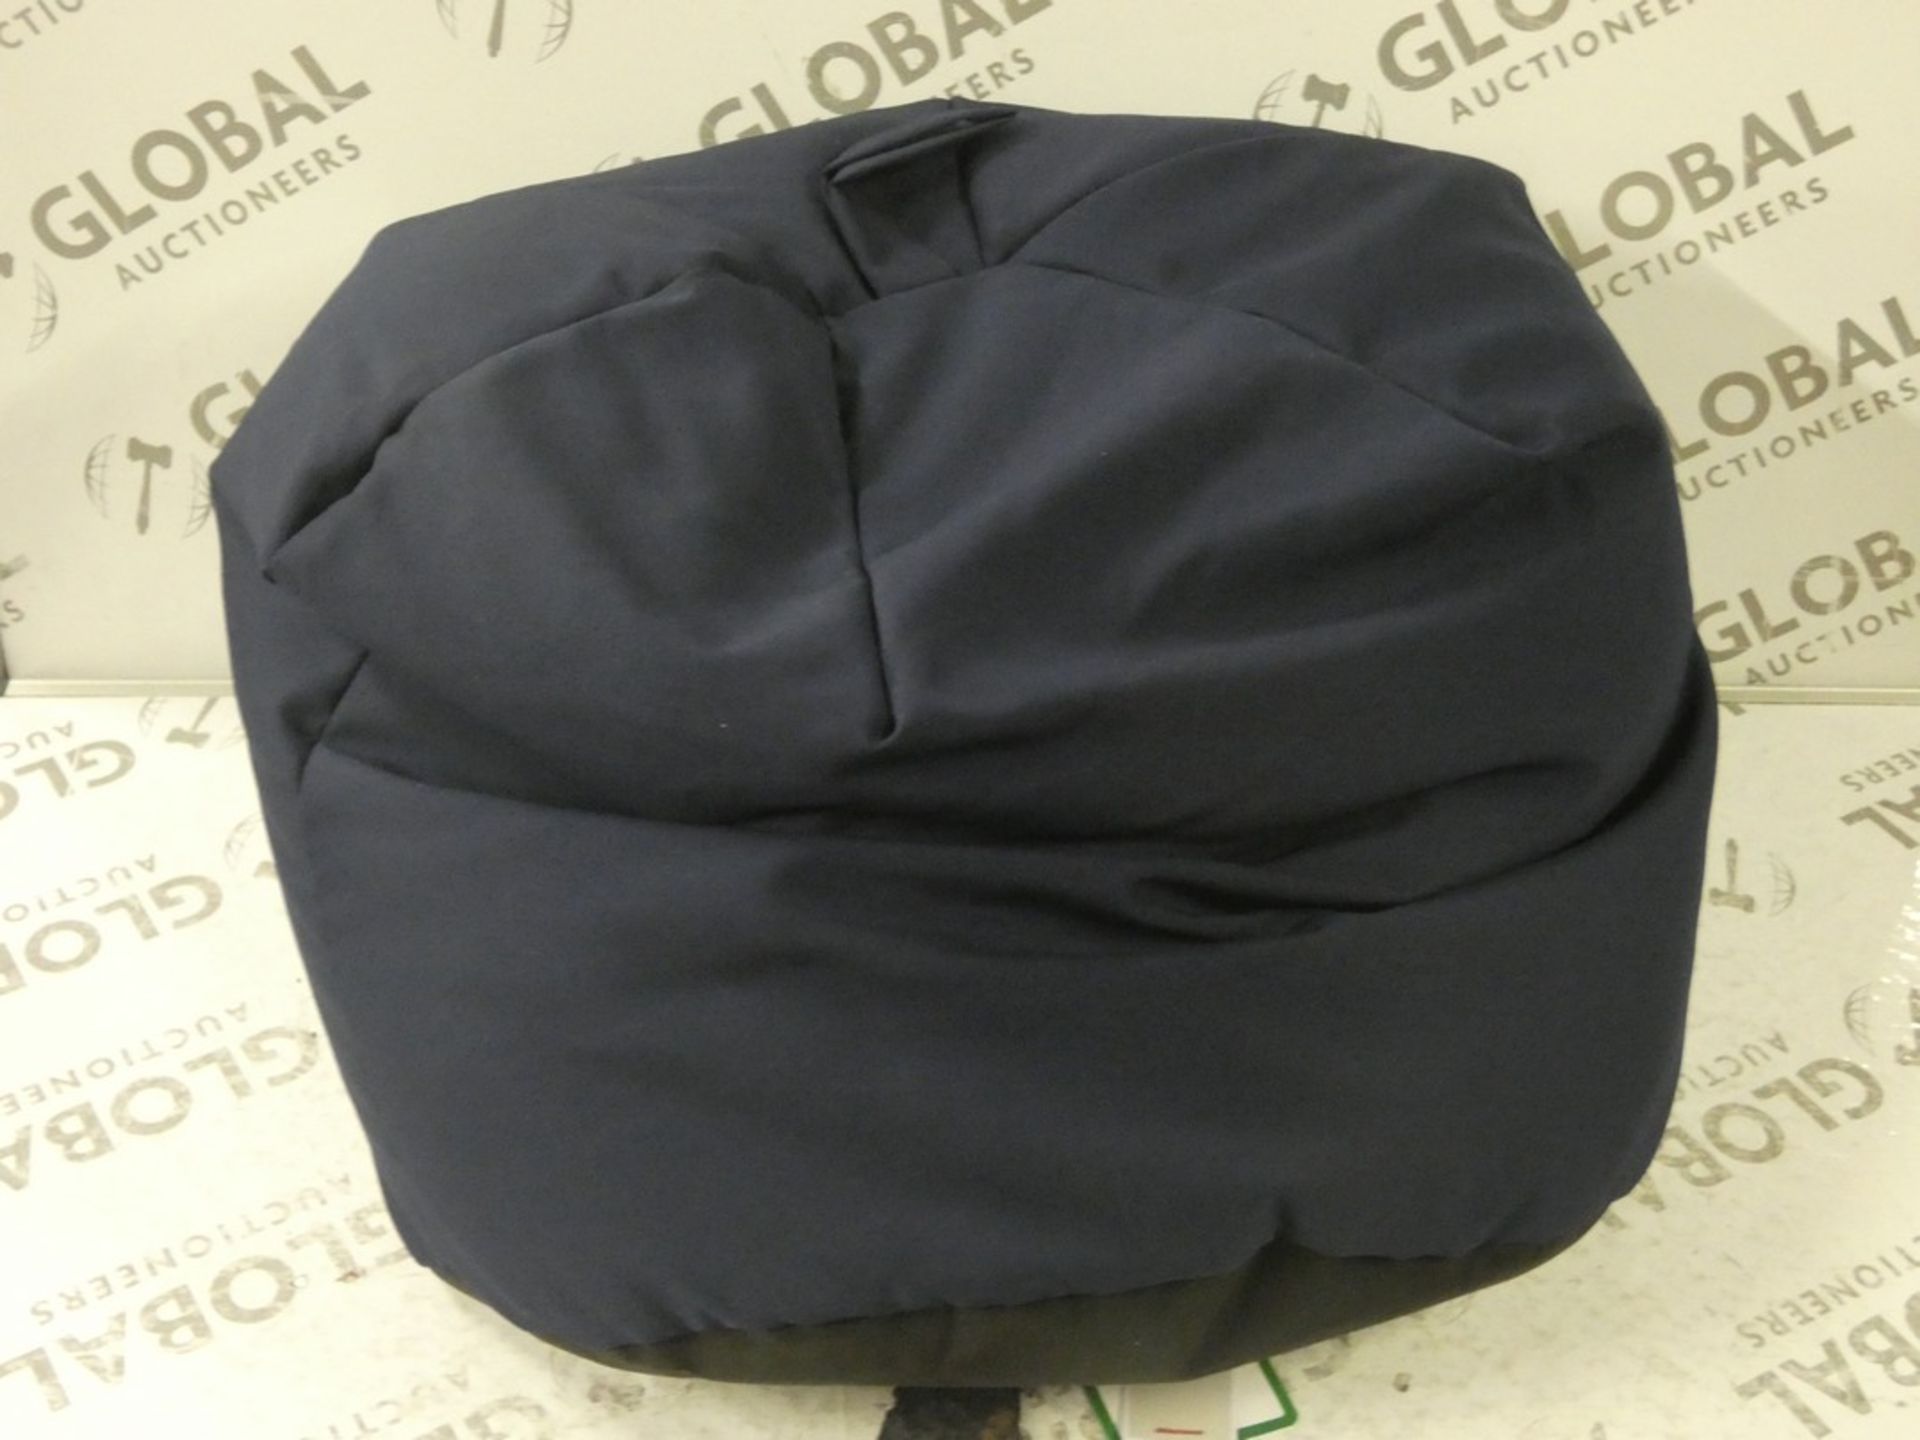 John Lewis Hugo Plain Navy Bean Bag RRP £50 (Viewing or Appraisals Highly Recommended)